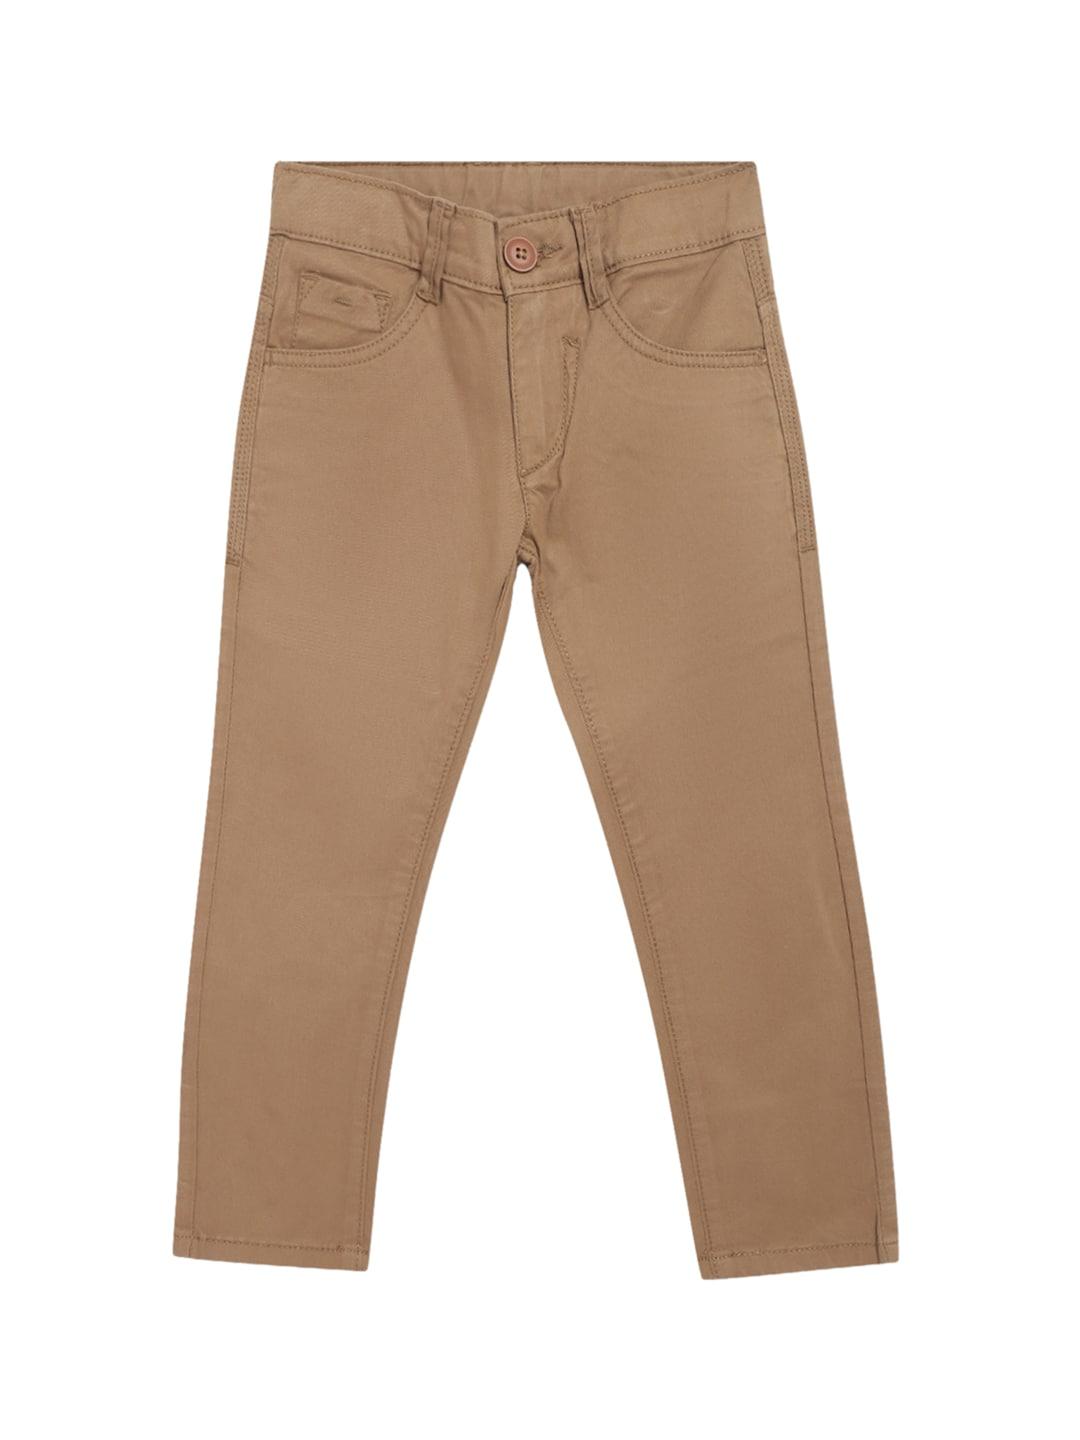 Cantabil Boys Chinos Cotton Trousers